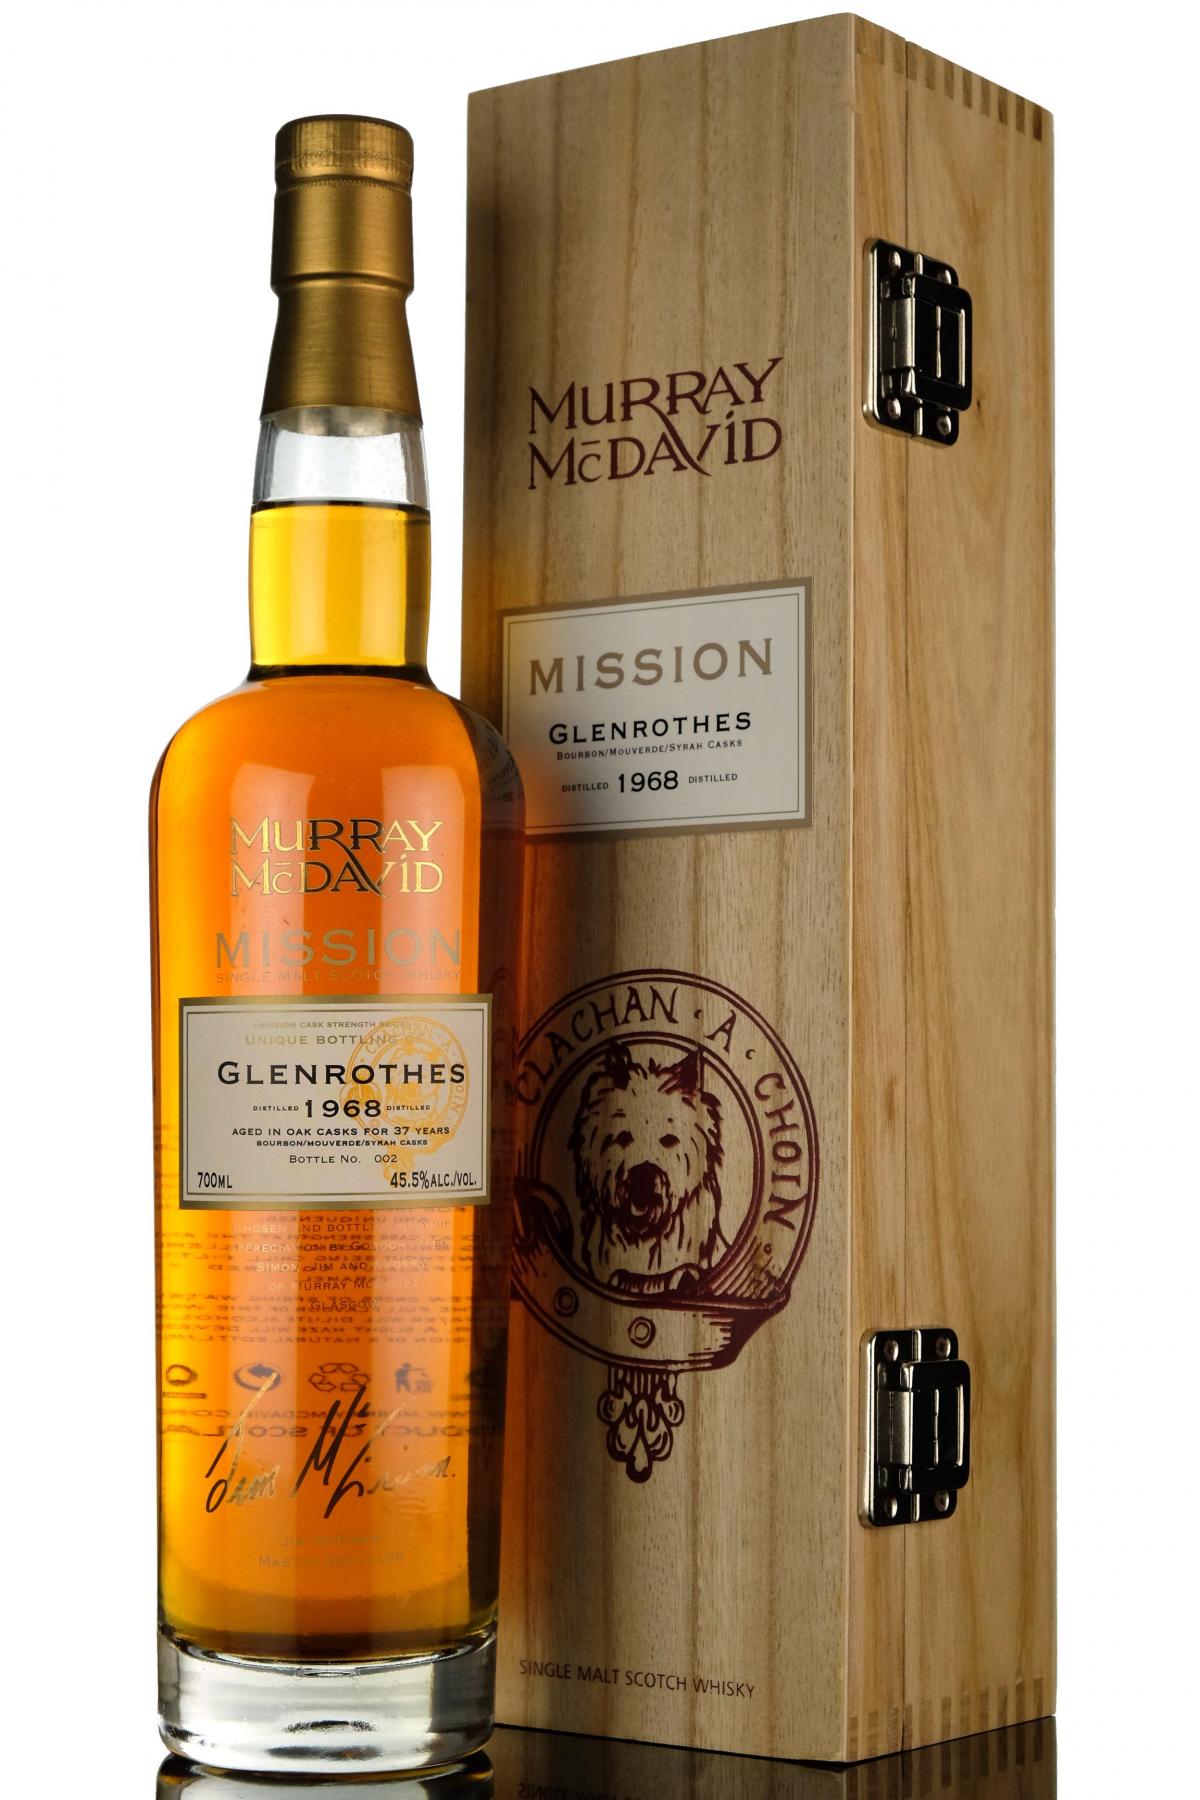 Glenrothes 1968 - 37 Year Old - Murray McDavid Mission